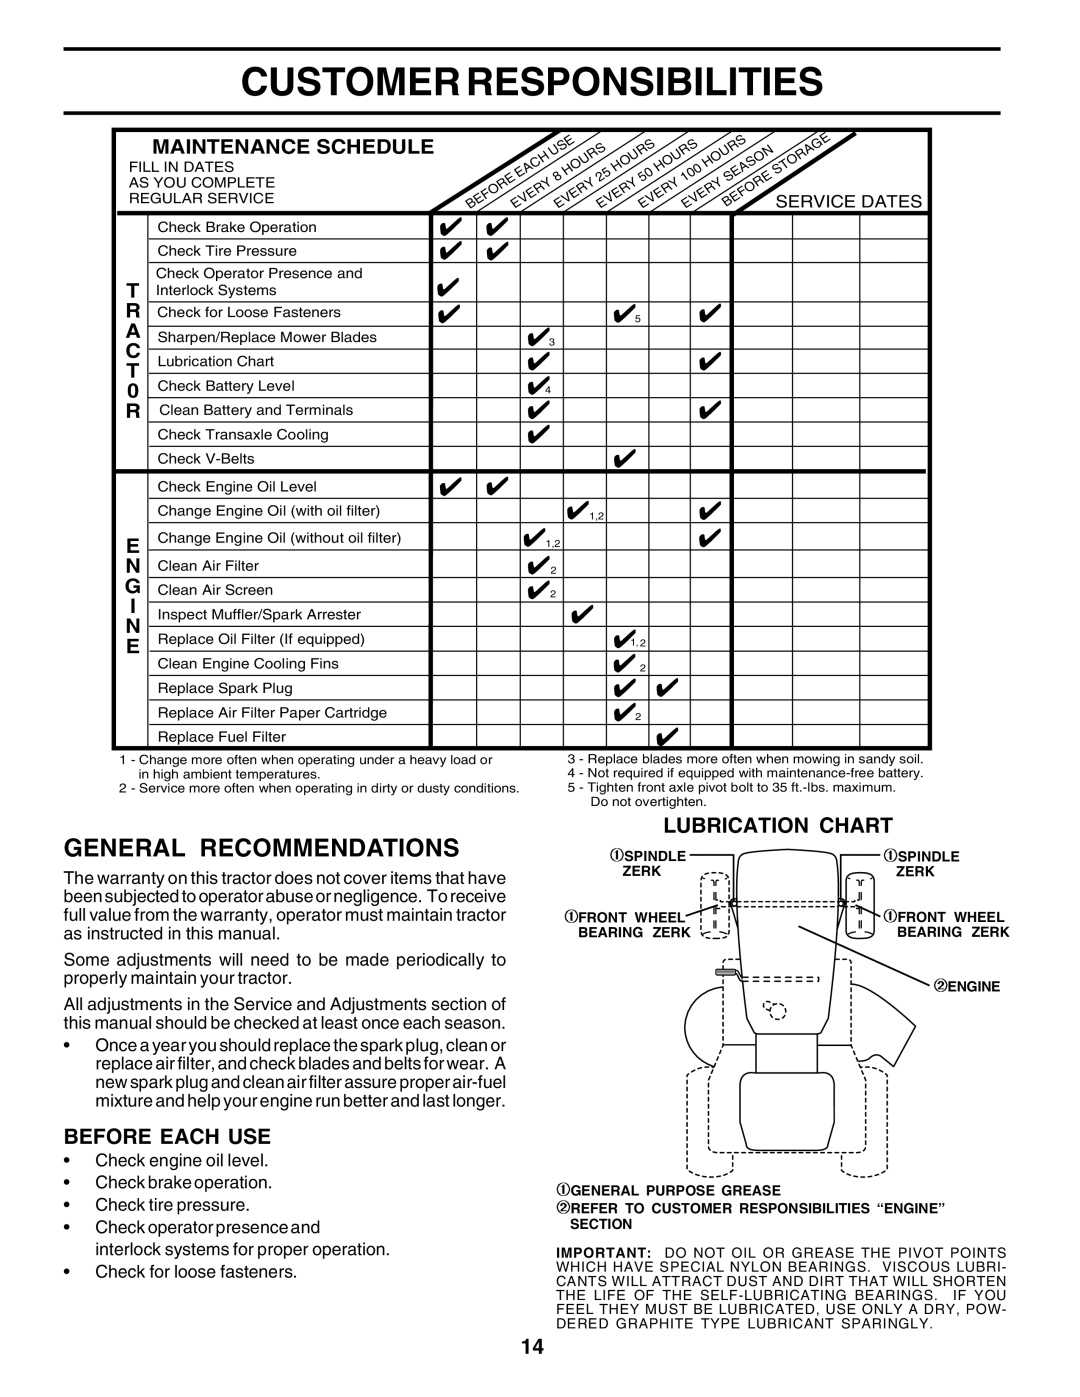 Poulan 182946 Customer Responsibilities, General Recommendations, Before Each Use, Lubrication Chart, Maintenance Schedule 